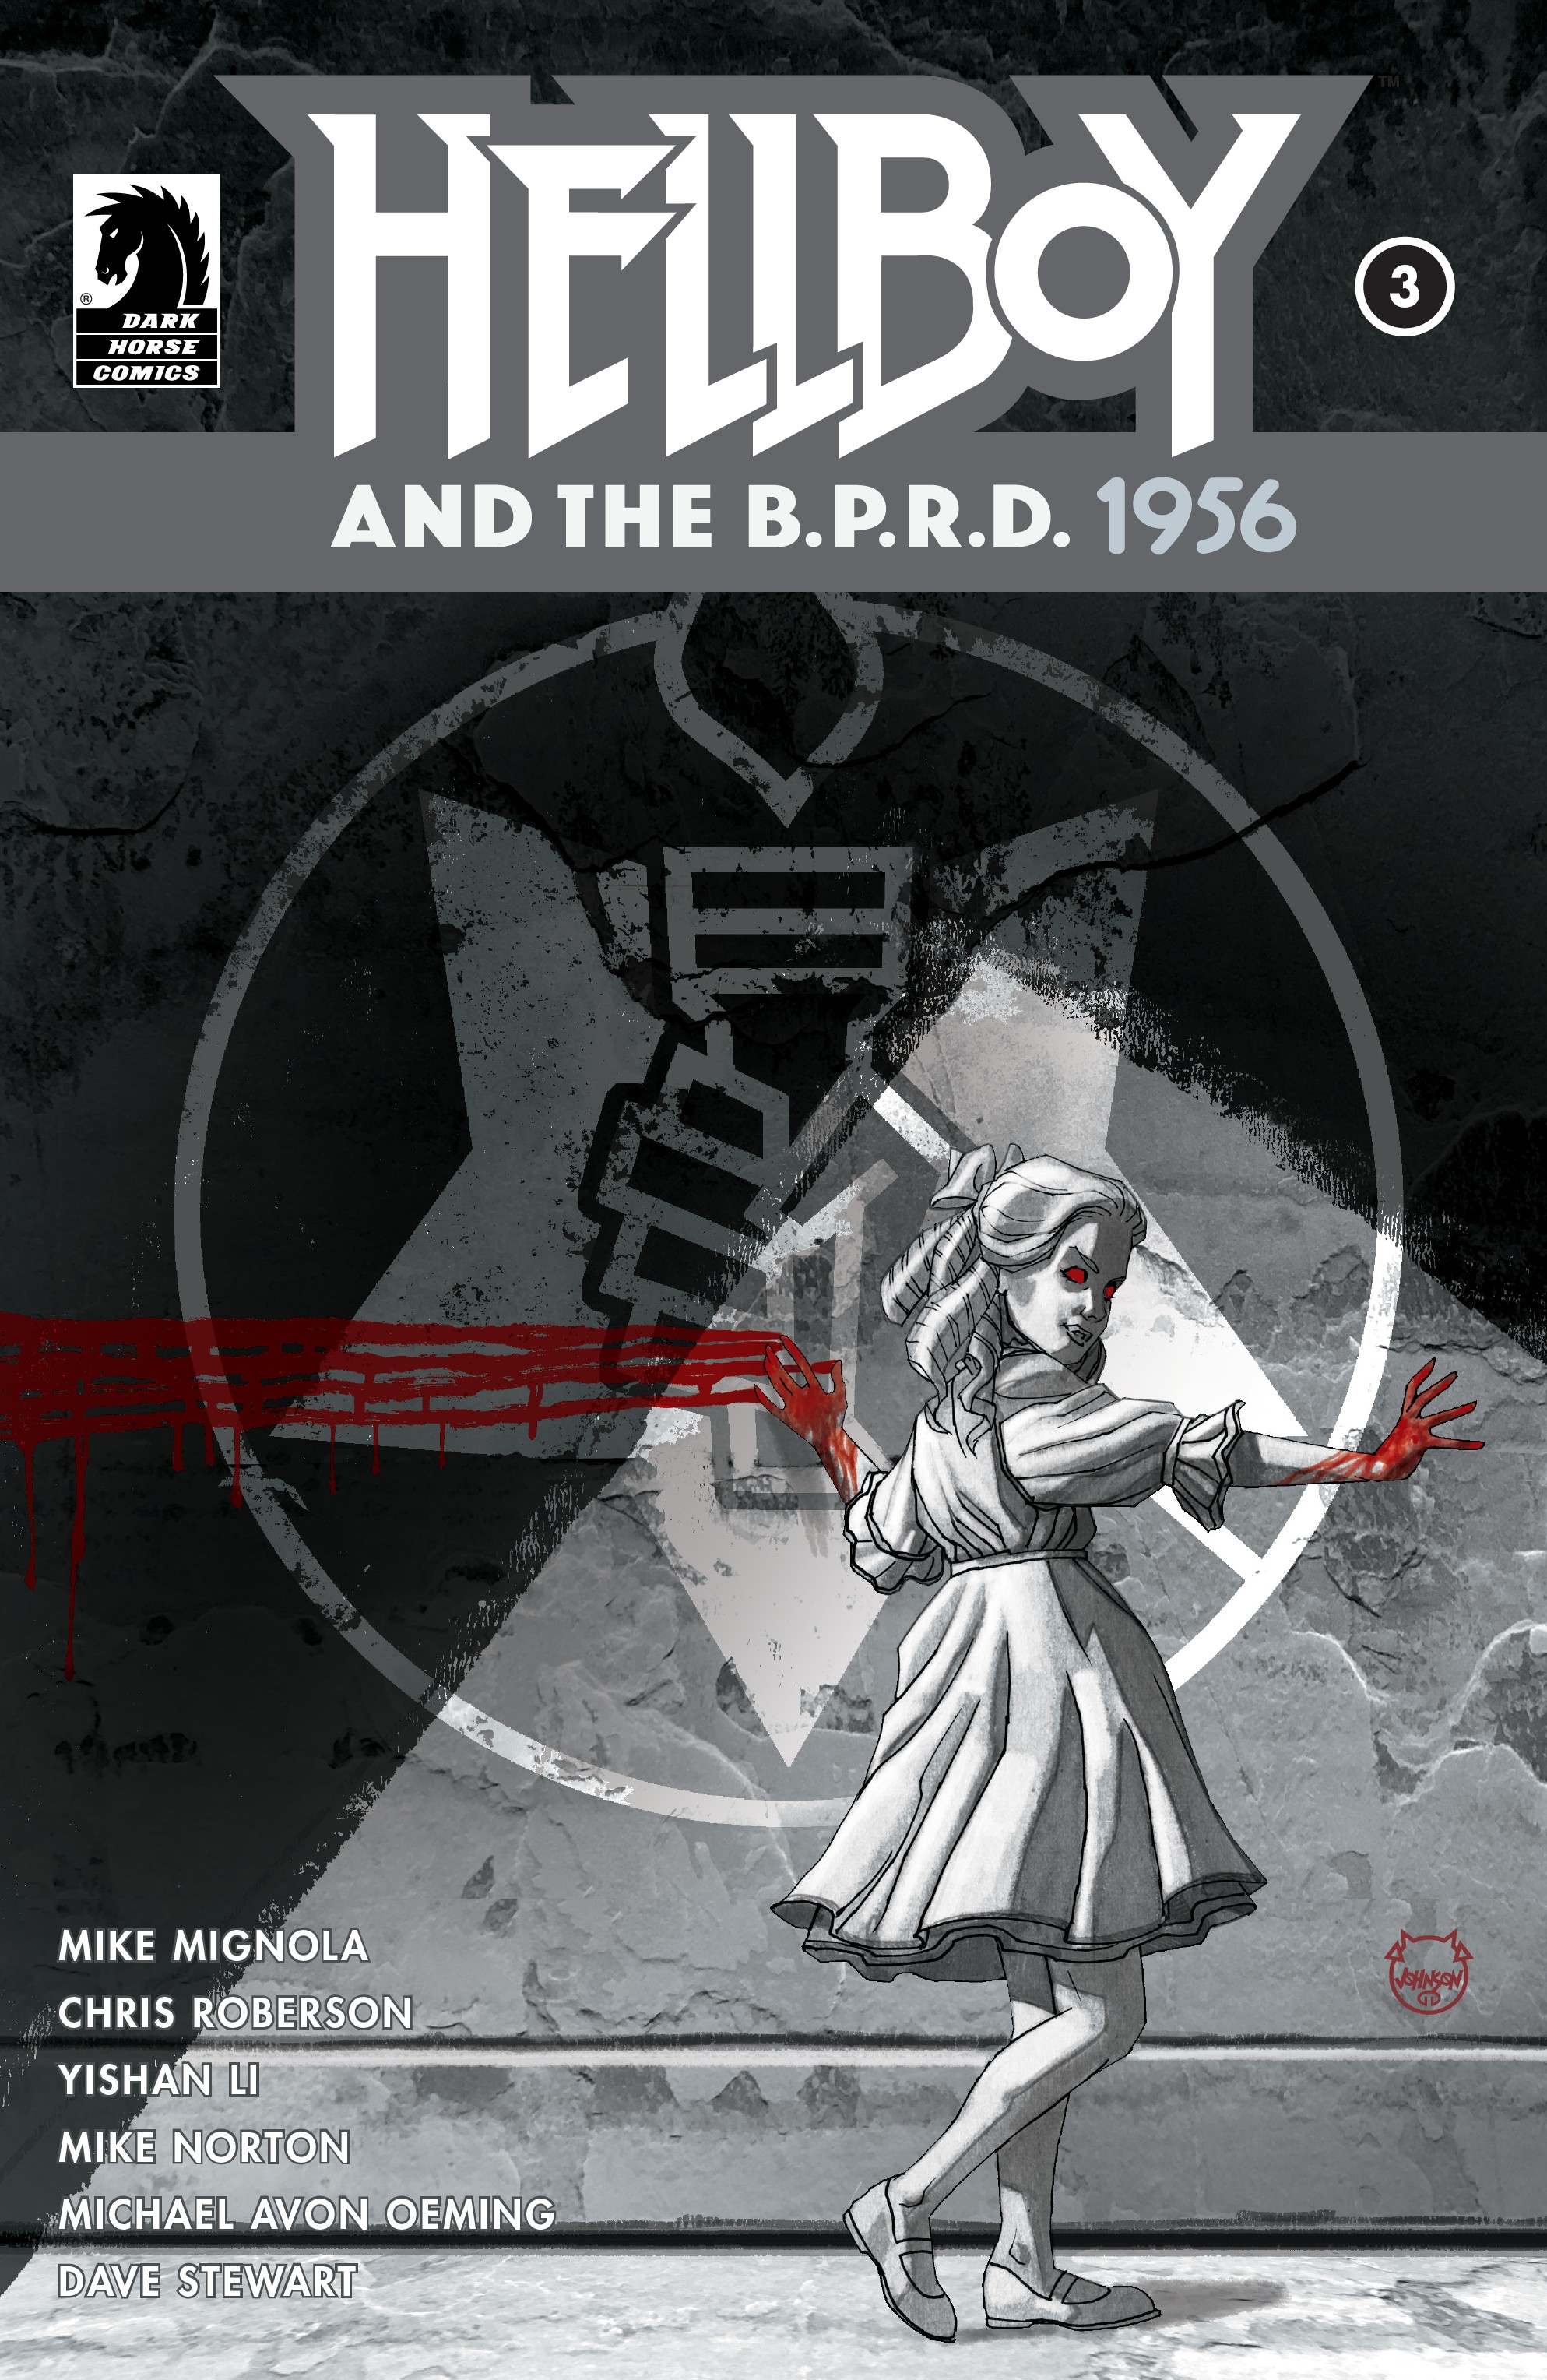 Read online Hellboy and the B.P.R.D. 1956 comic -  Issue #3 - 1